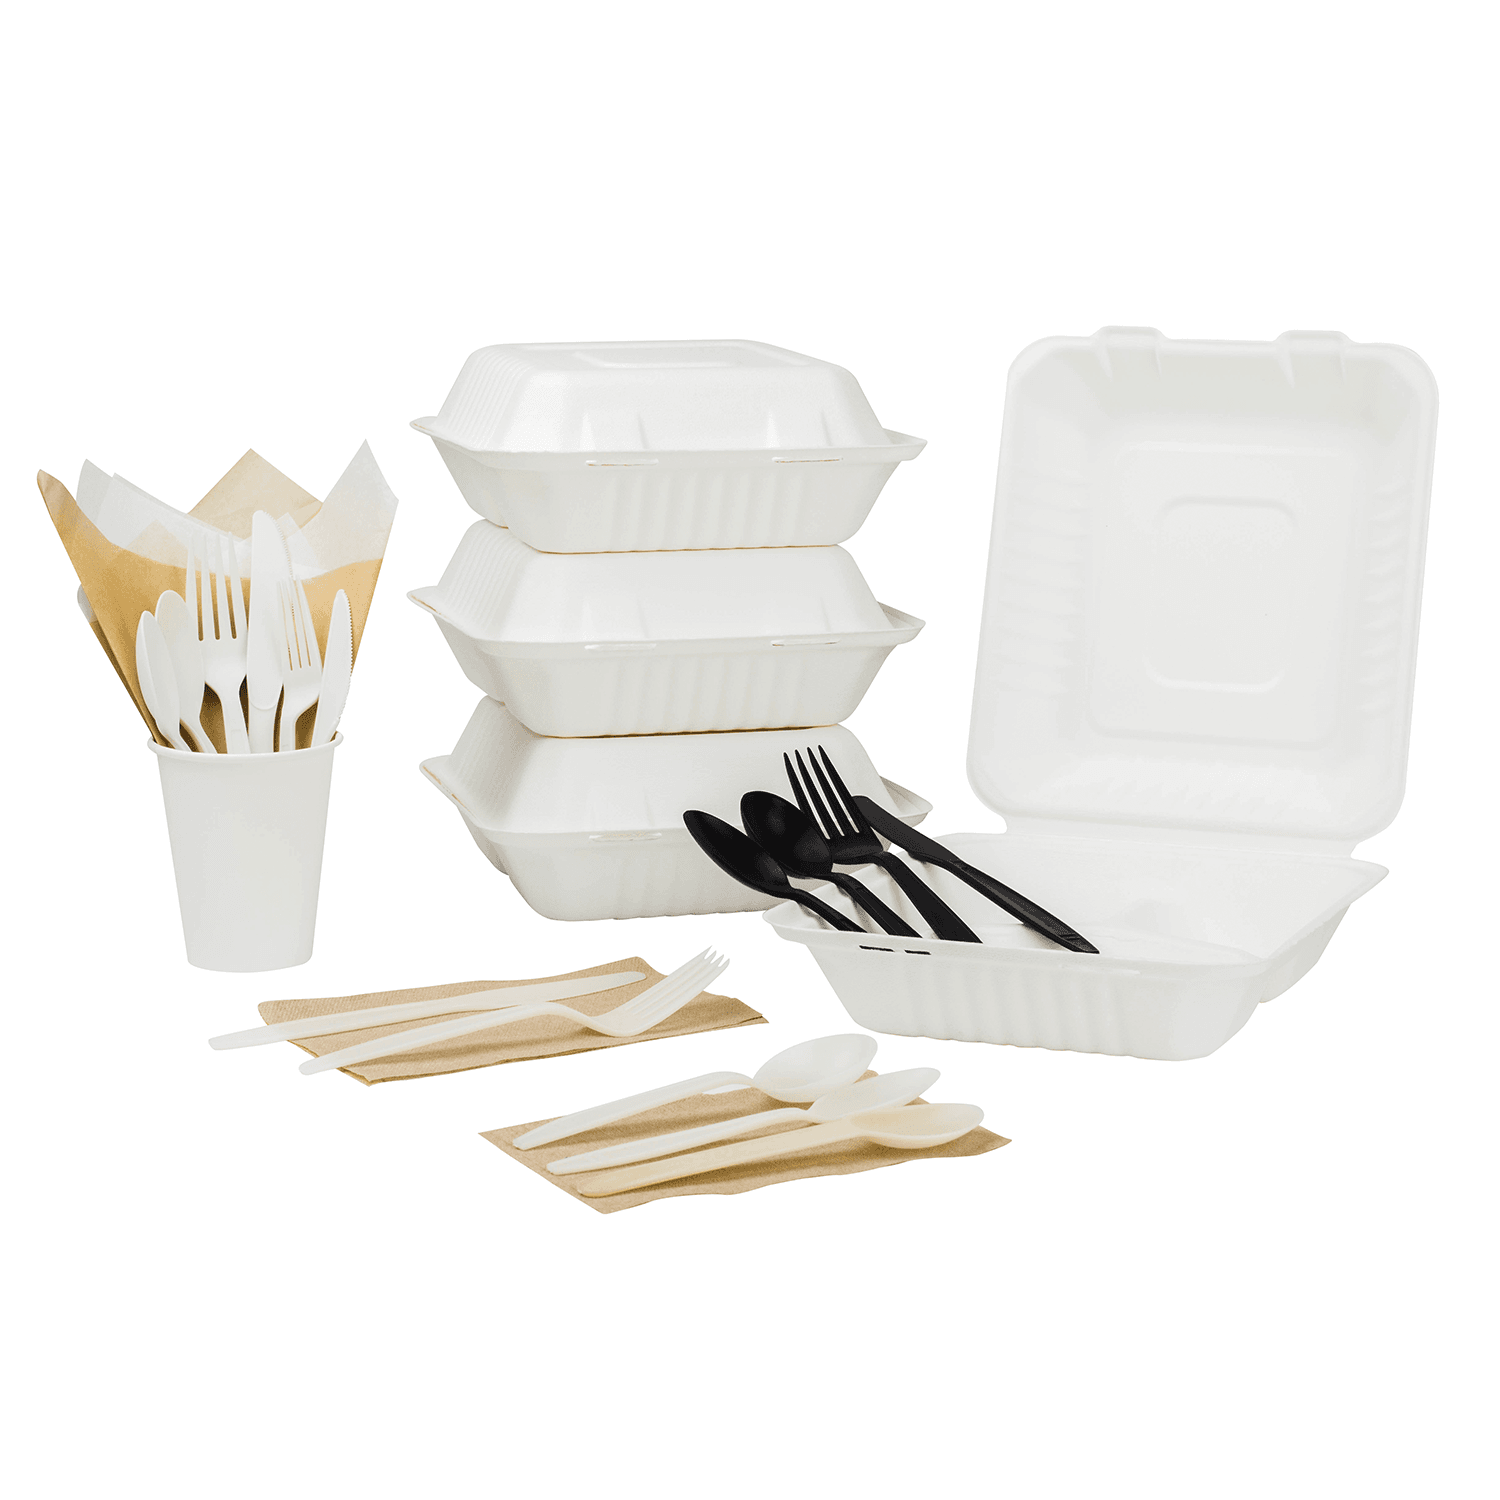 Karat Earth 8''x8'' PFAS Free Compostable Bagasse Hinged Containers, White, 3 Compartments - 200 pcs